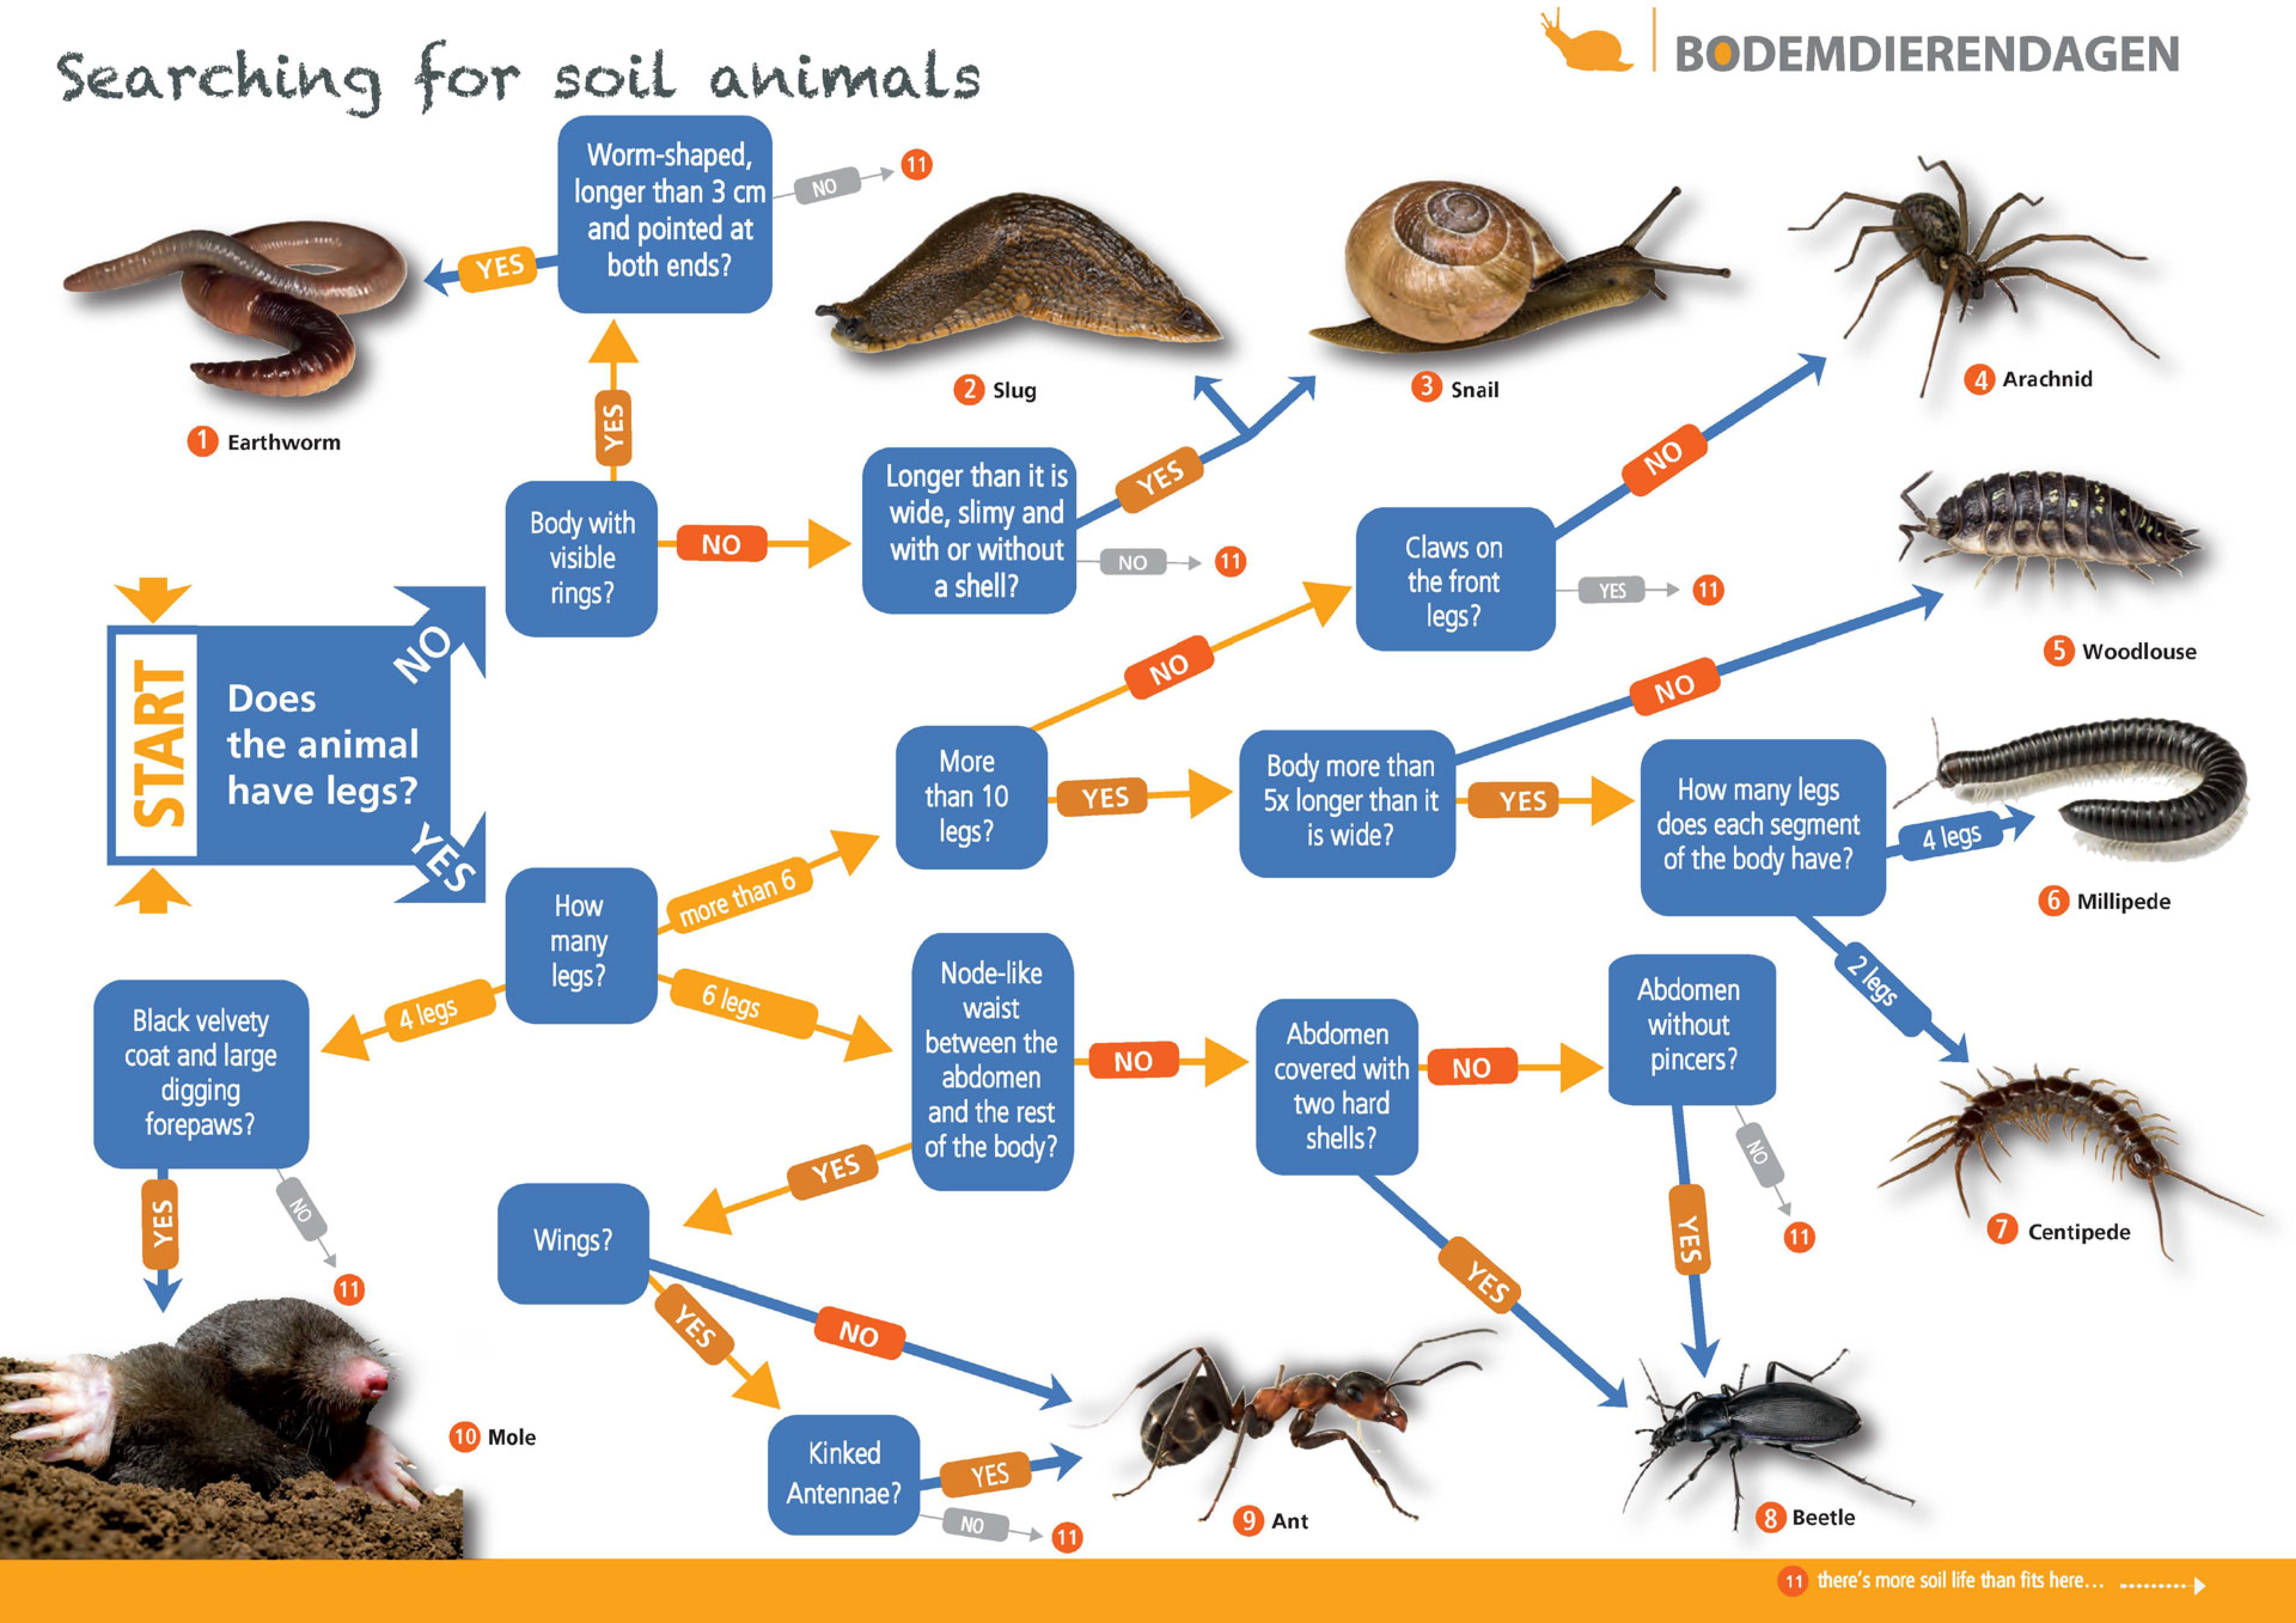 Identification aid for soil animals